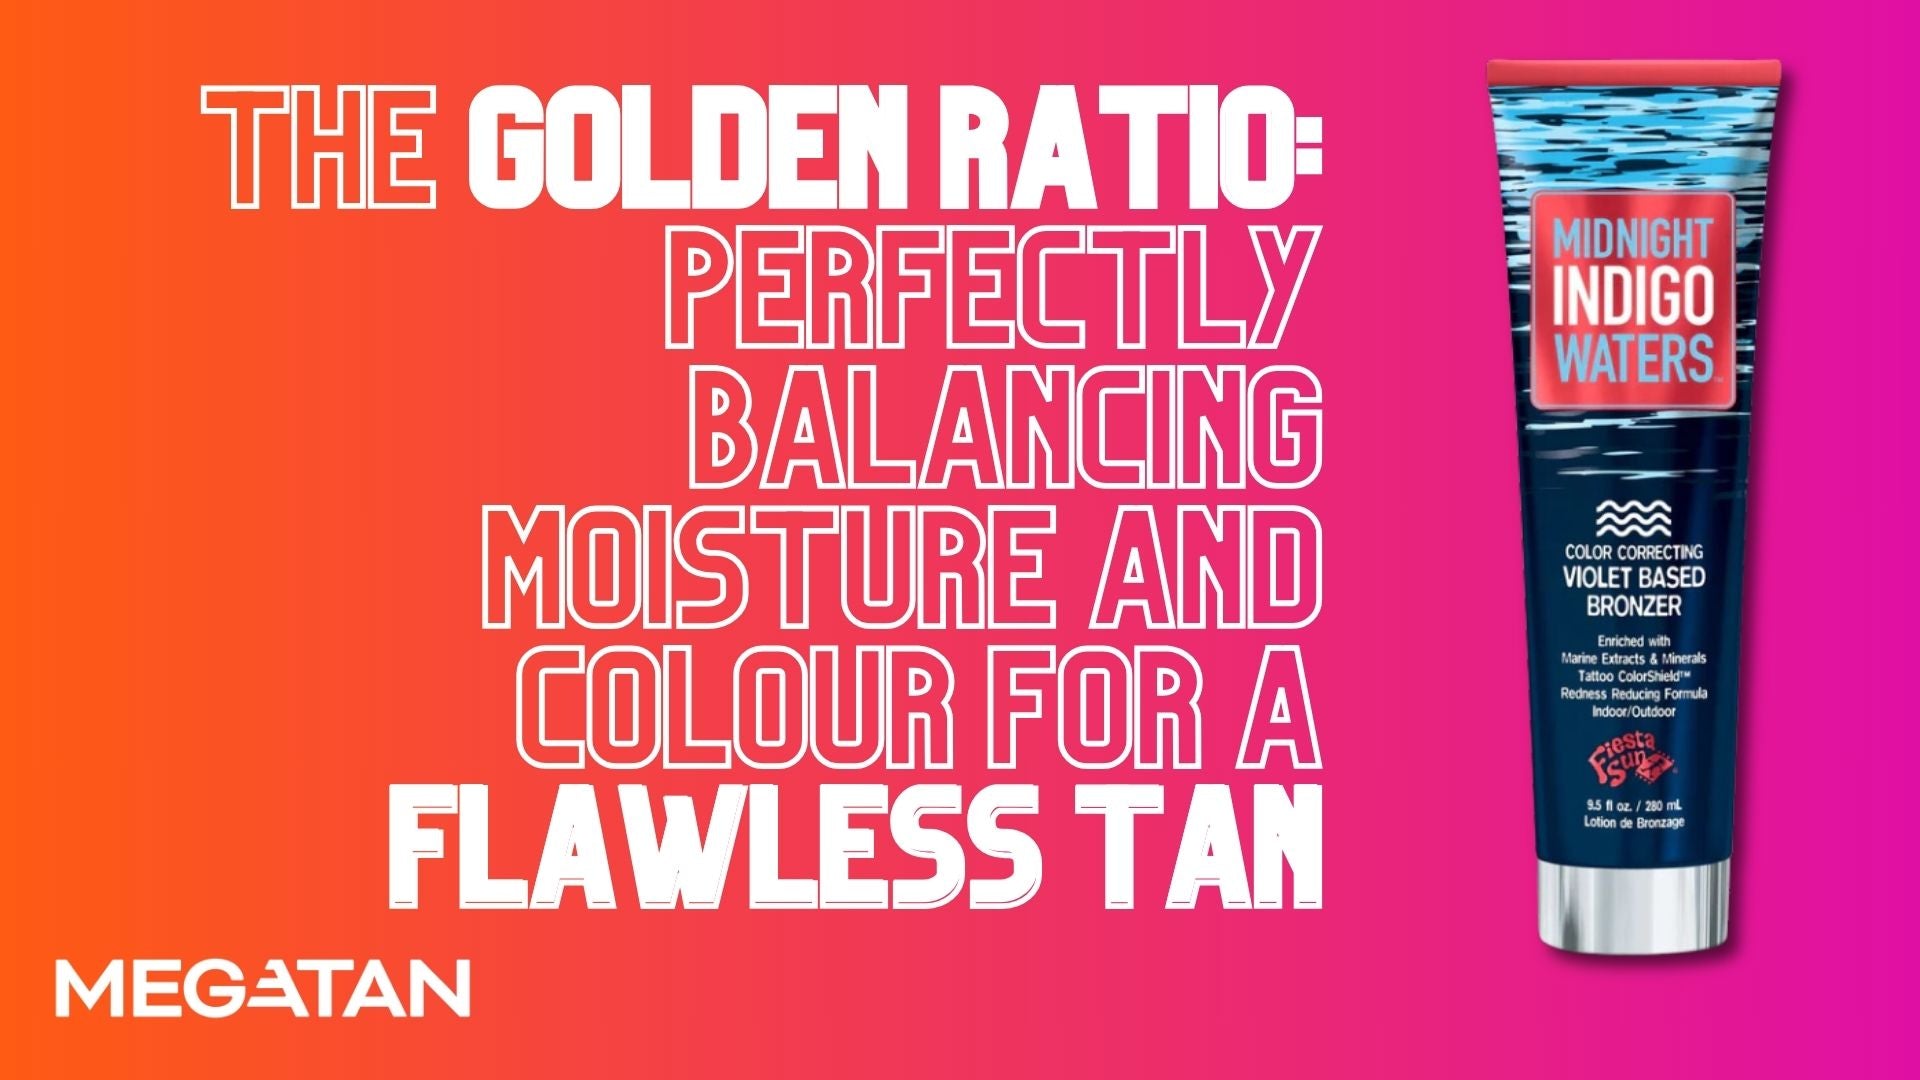 The Golden Ratio: Perfectly Balancing Moisture and Colour for a Flawless Tan